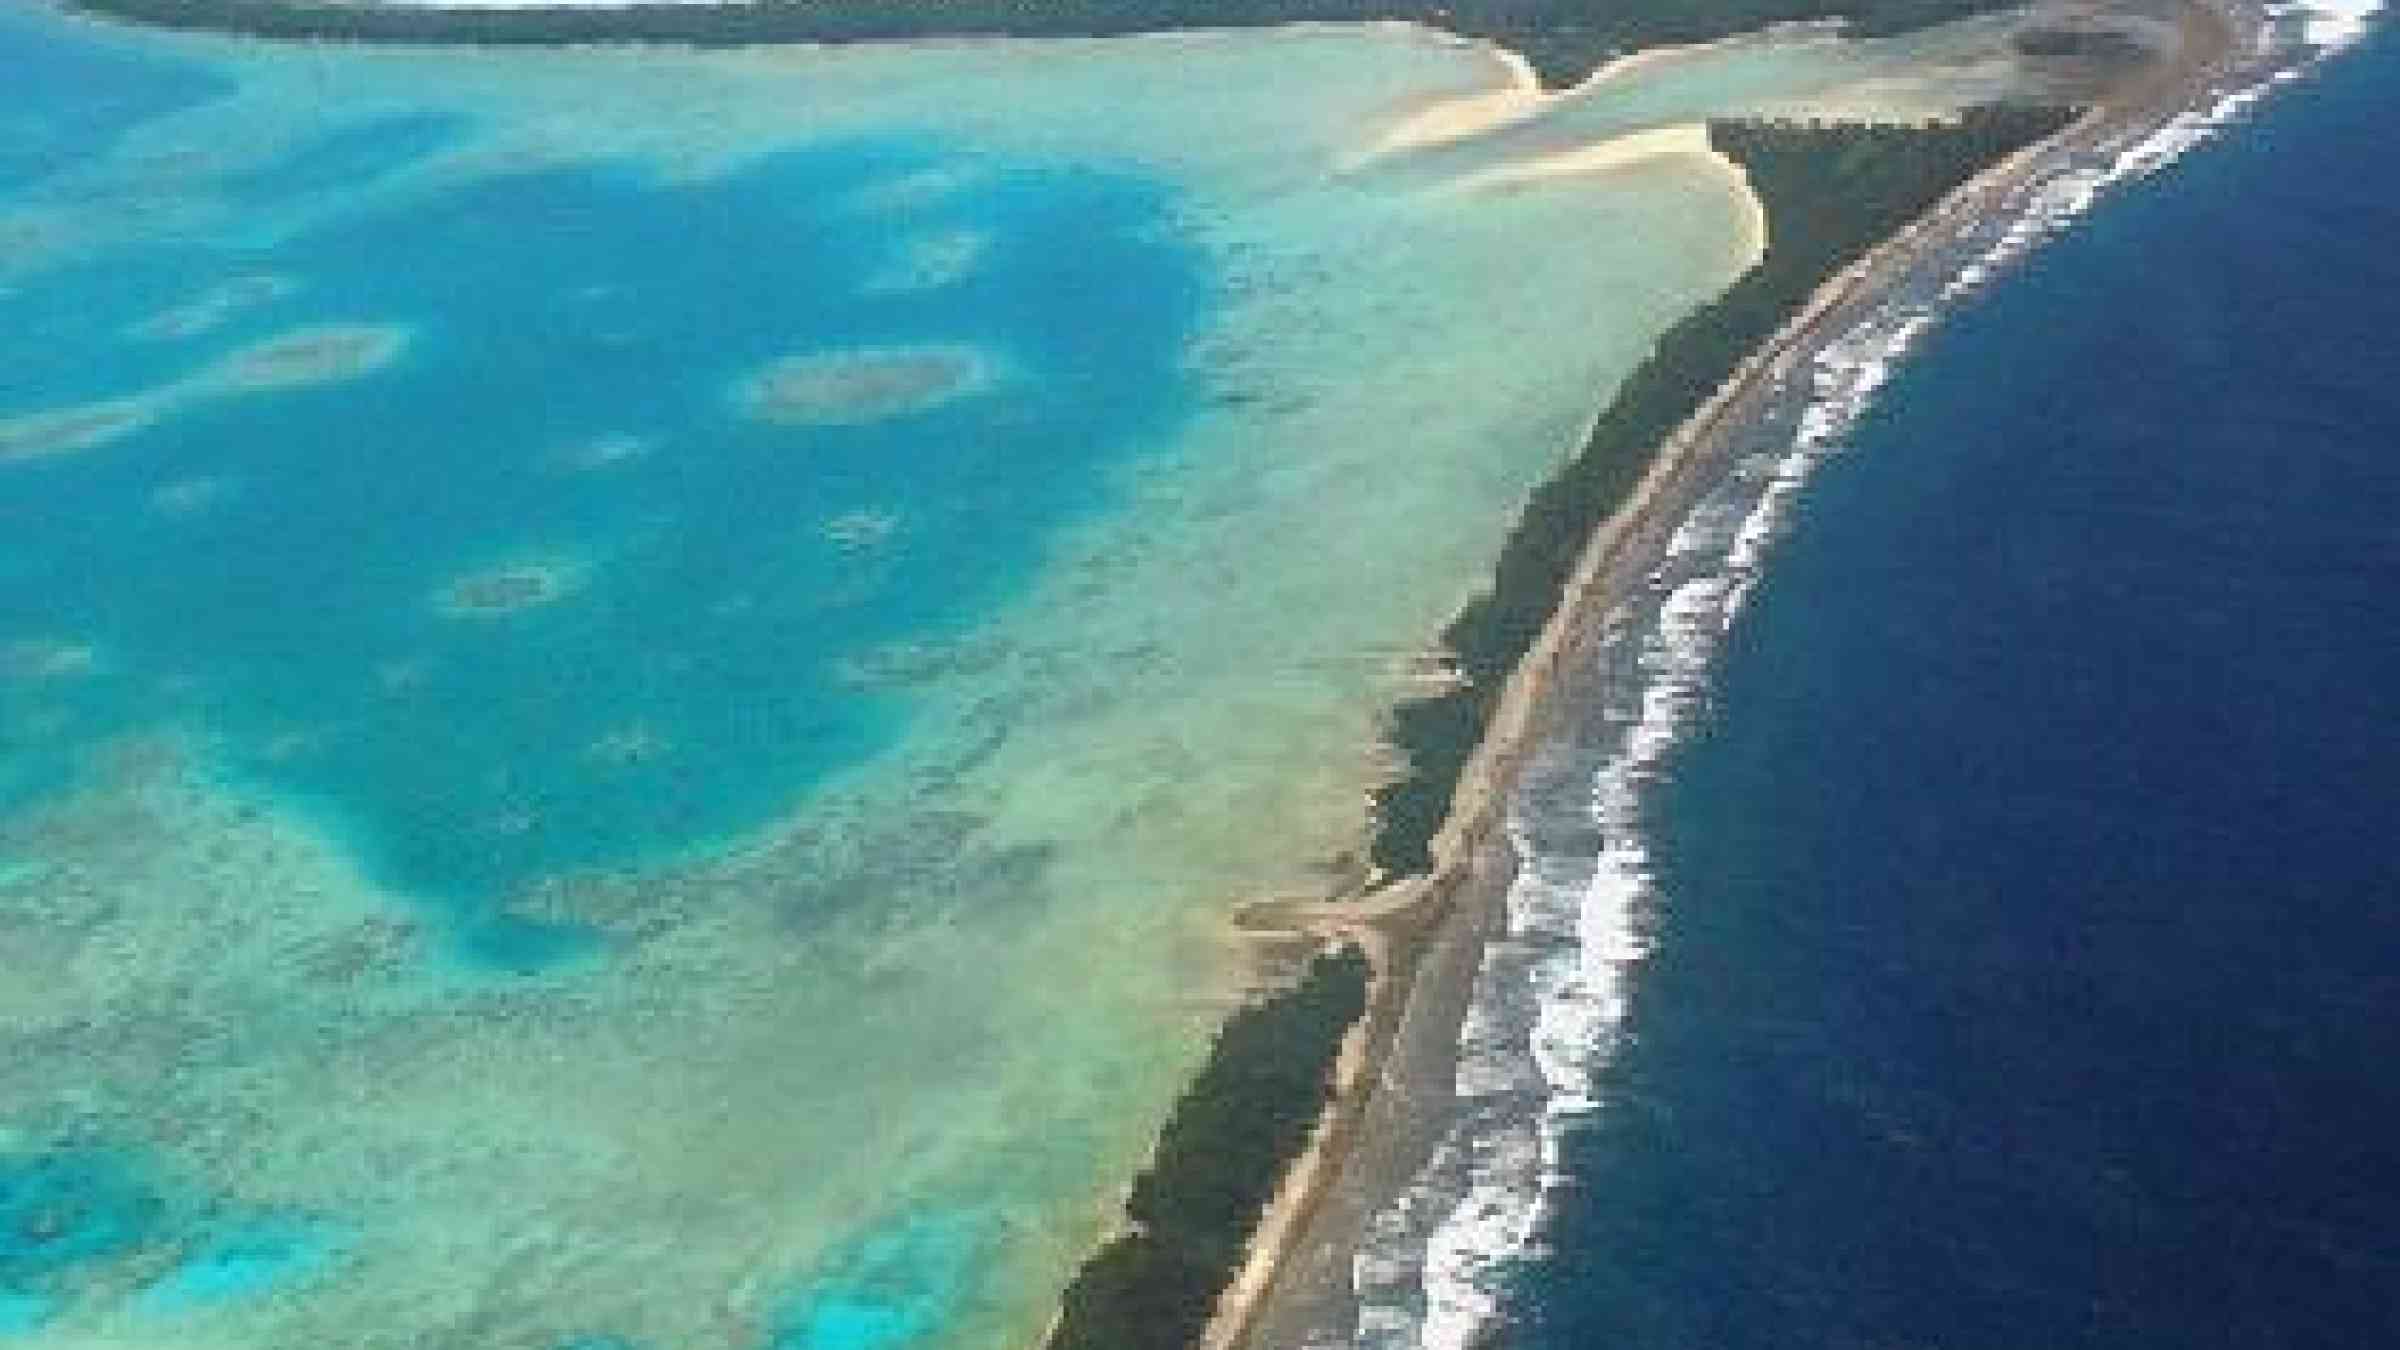 The countries in the Insurance Development Forum's focus include the Pacific island nation of Tuvalu. A remote territory of low-lying atolls, it is among the most climate-change vulnerable countries in the world. (Photo: Lily-Anne Homasi/DFAT)